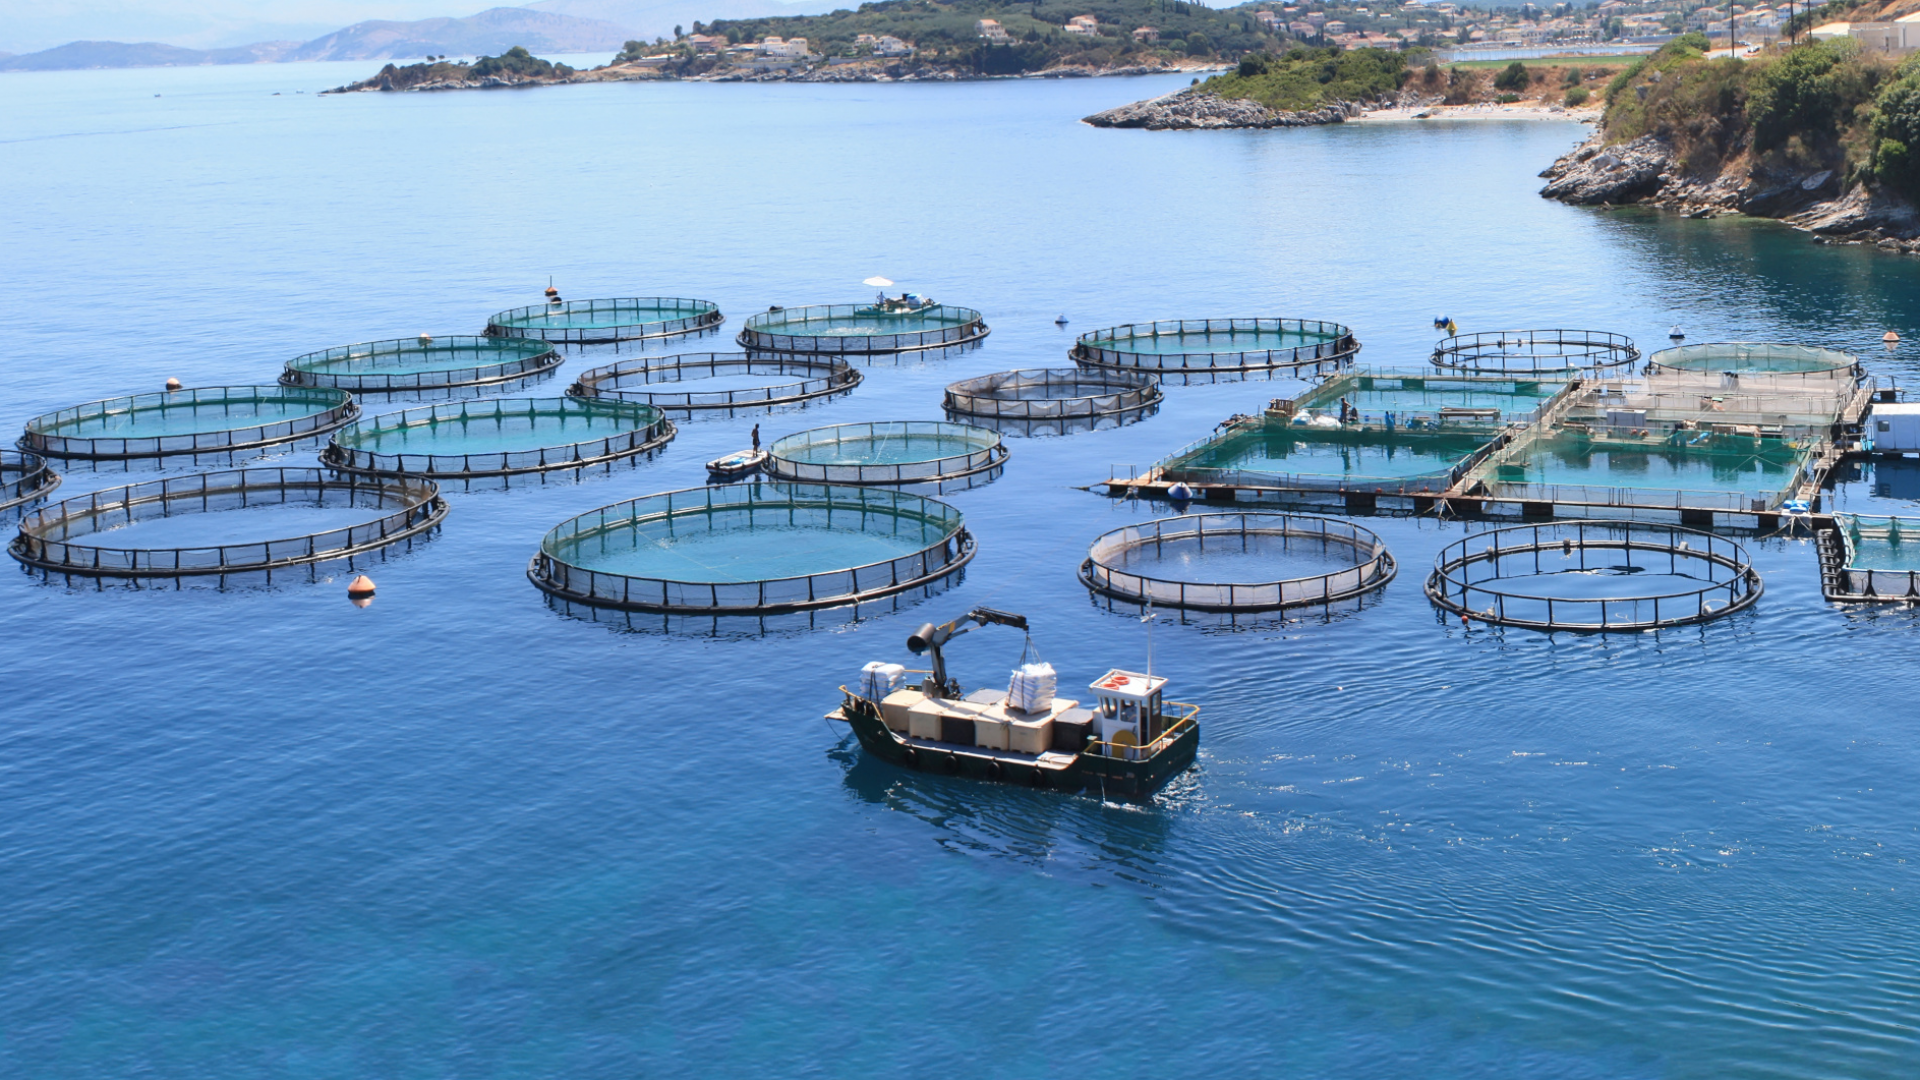 Feed components from fungi: the key to a sustainable fish supply?